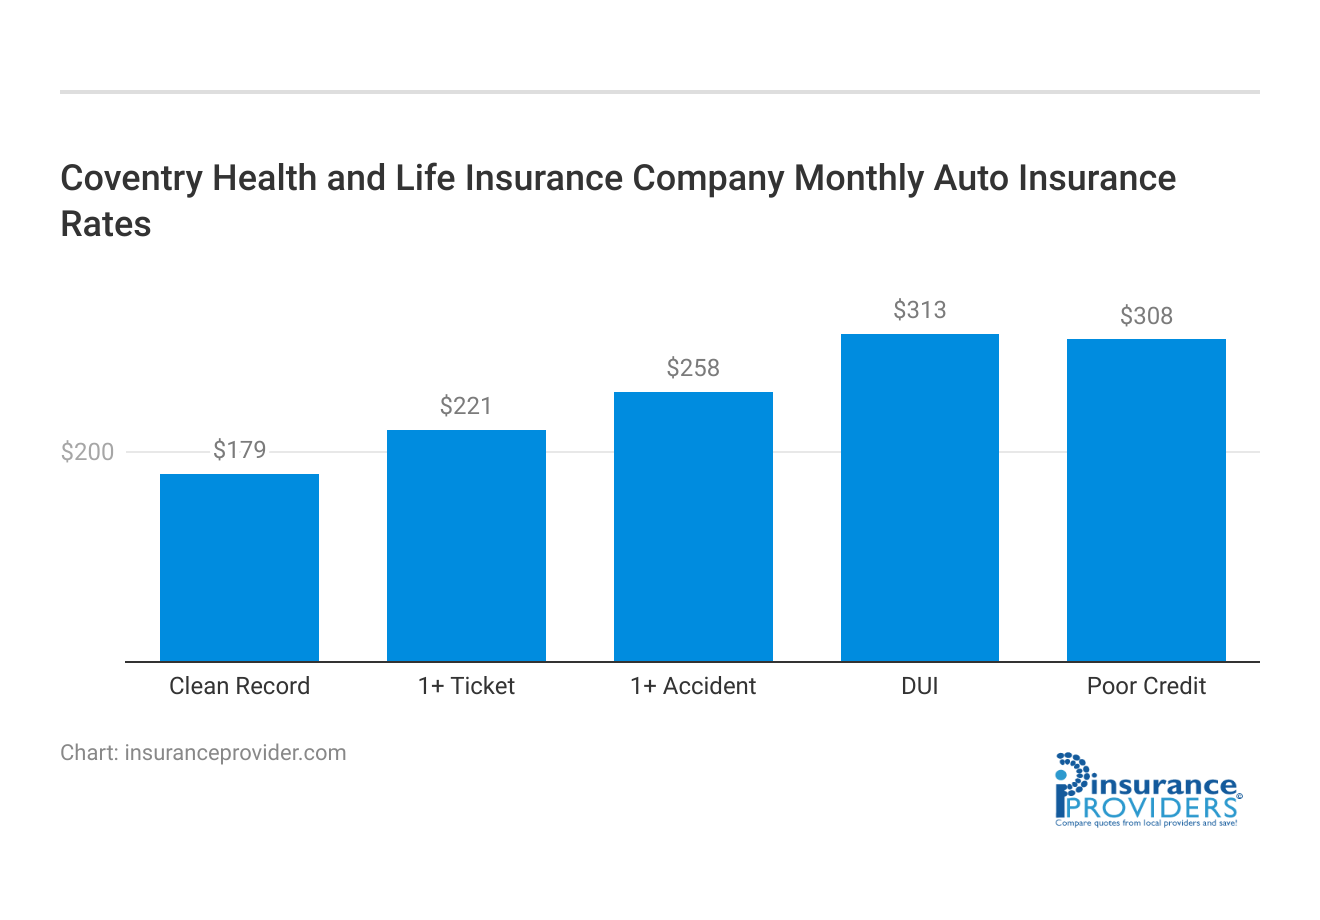 <h3>Coventry Health and Life Insurance Company Monthly Auto Insurance Rates</h3>